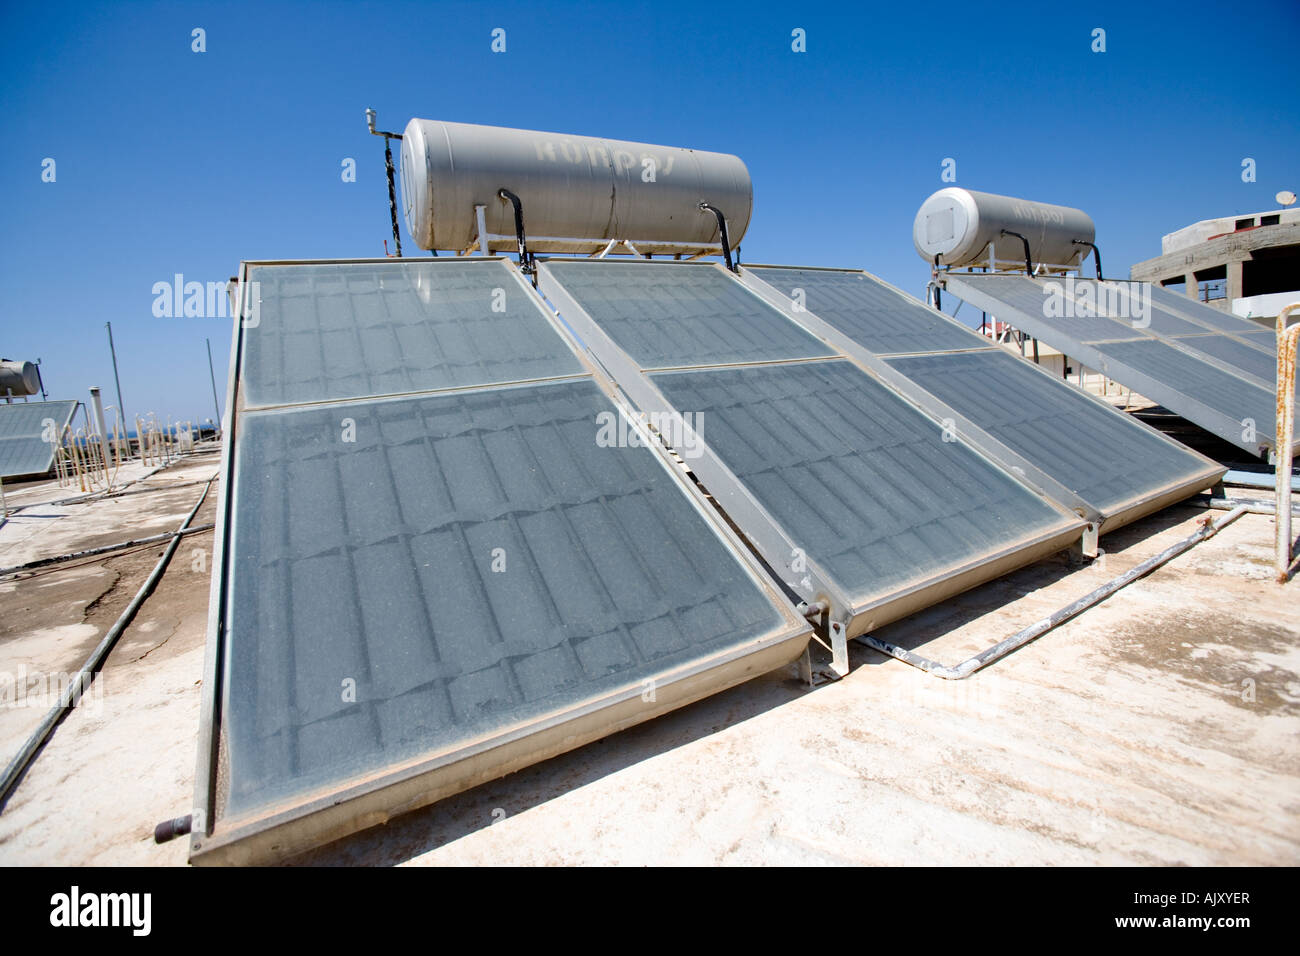 Solar Water Heating Panels on Hotel Roof in Crete,Greece Stock Photo